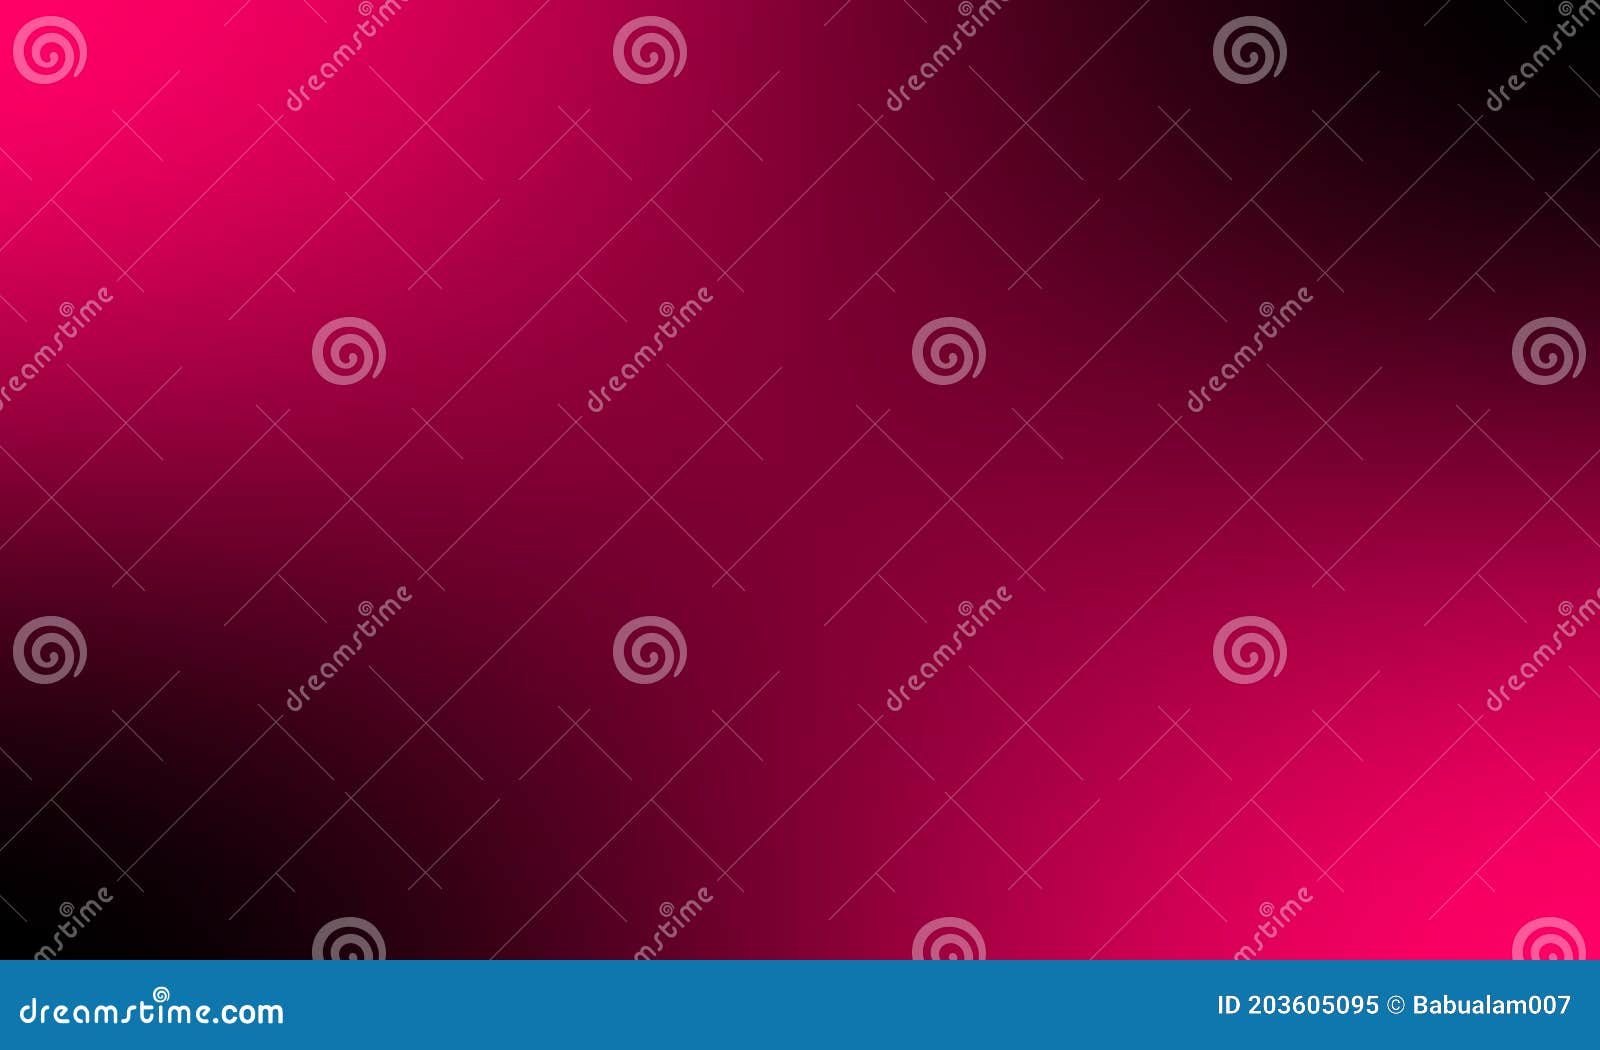 Abstract Vector with Dark Pink Rani Color Shaded Wavy Background with  Lighting Effect and Texture, Vector Illustration, . Stock Illustration -  Illustration of computer, making: 203605095